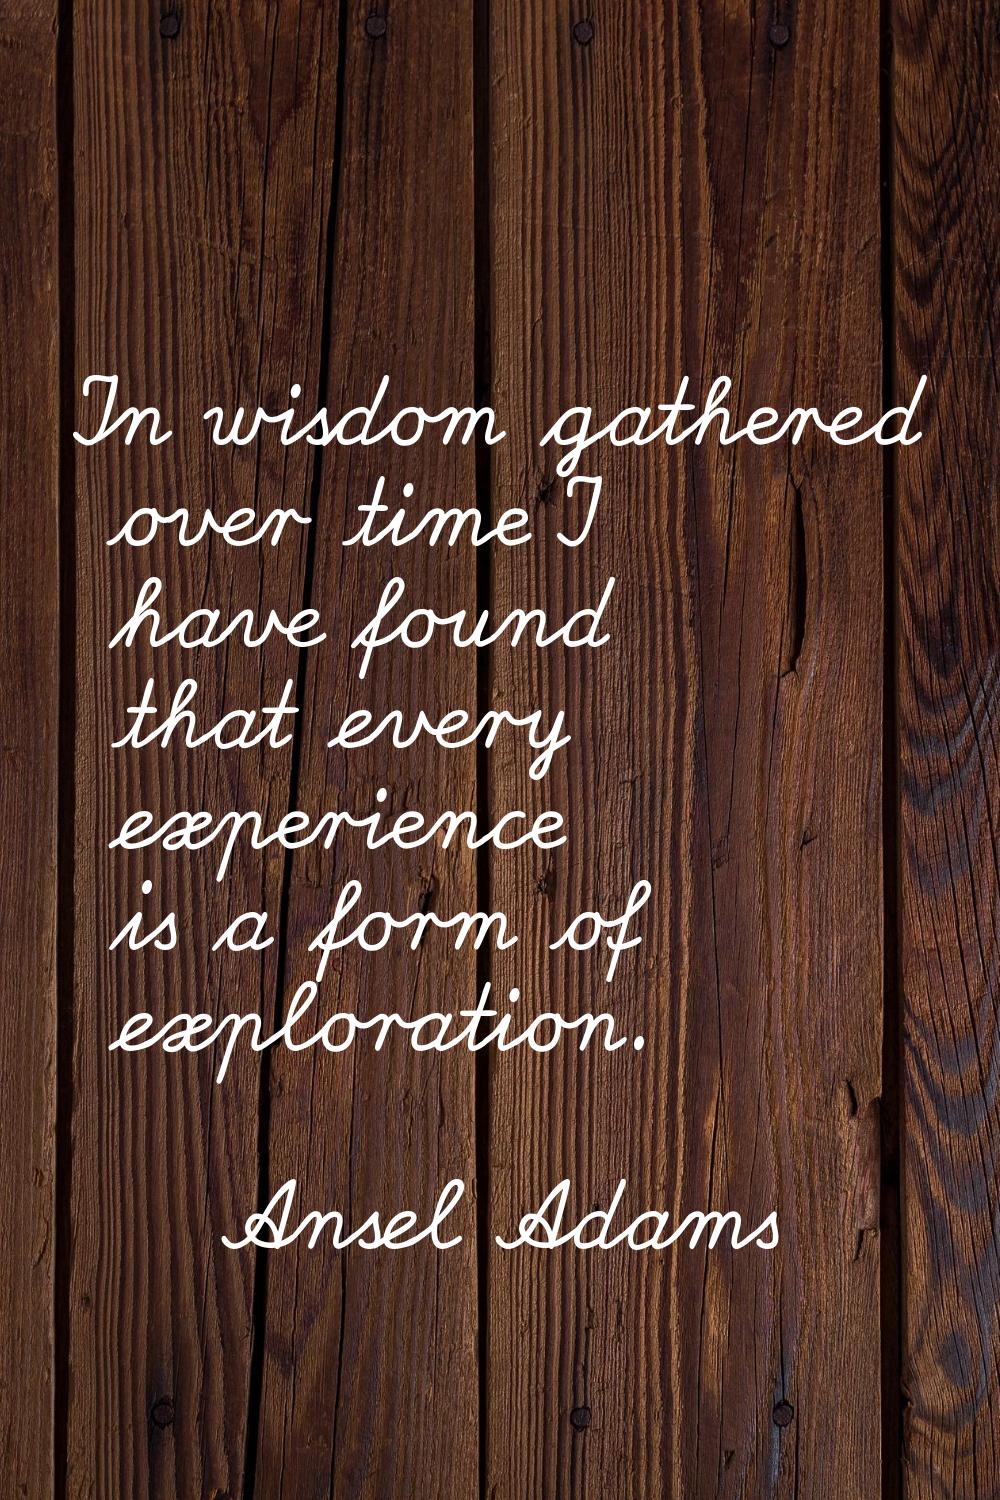 In wisdom gathered over time I have found that every experience is a form of exploration.